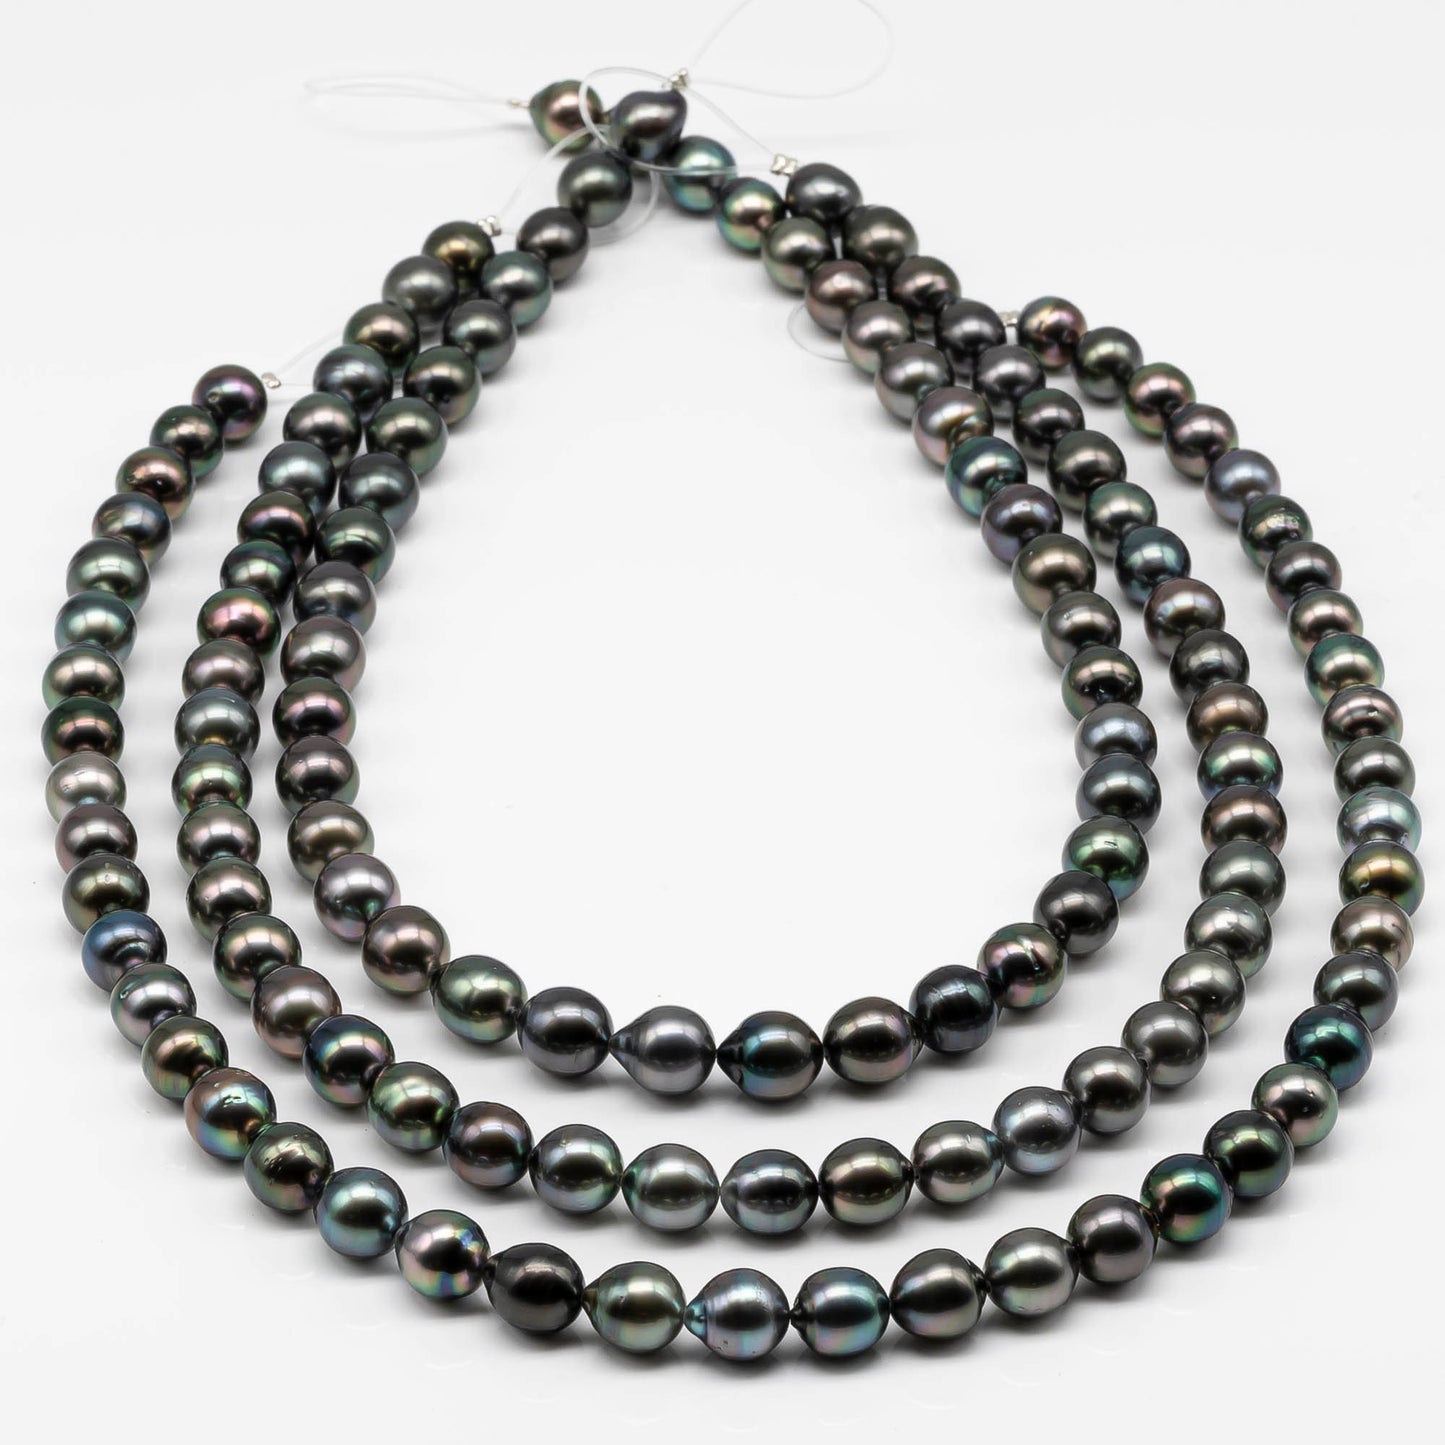 8-9mm Near Round Tahitian Pearl in Natural Color and High Luster with Minor Blemishes for Jewelry Making in Full Strand, SKU # 1703TH